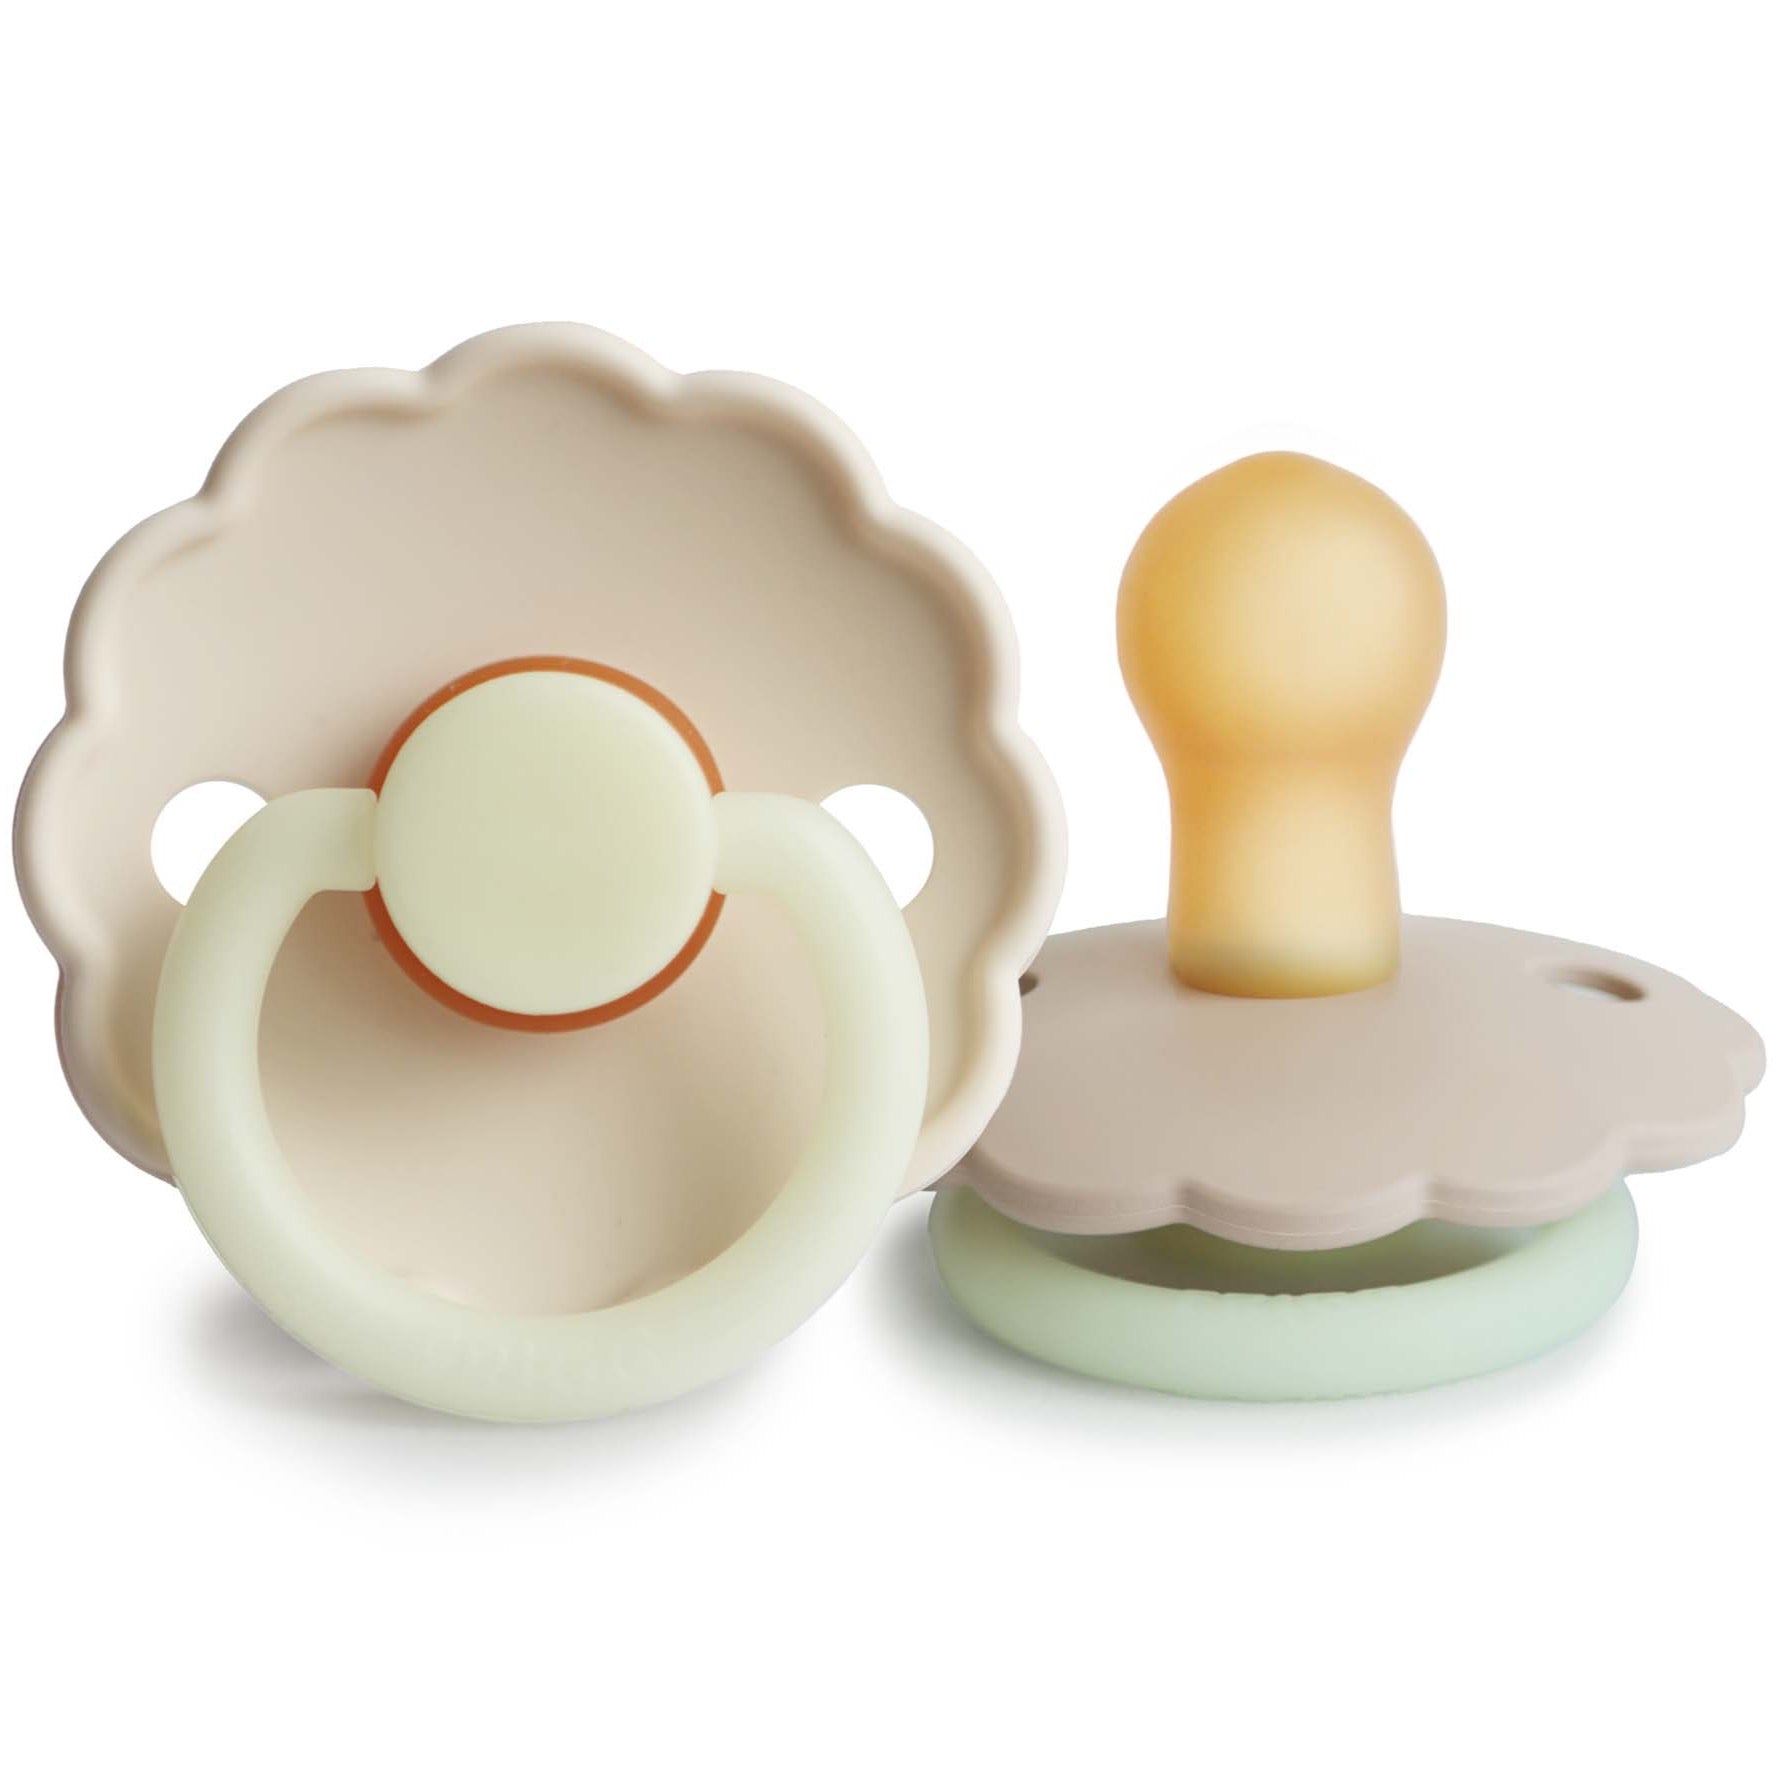 Neutral colored pacifiers. Base of the pacifier is shaped like a daisy with a light green handle.